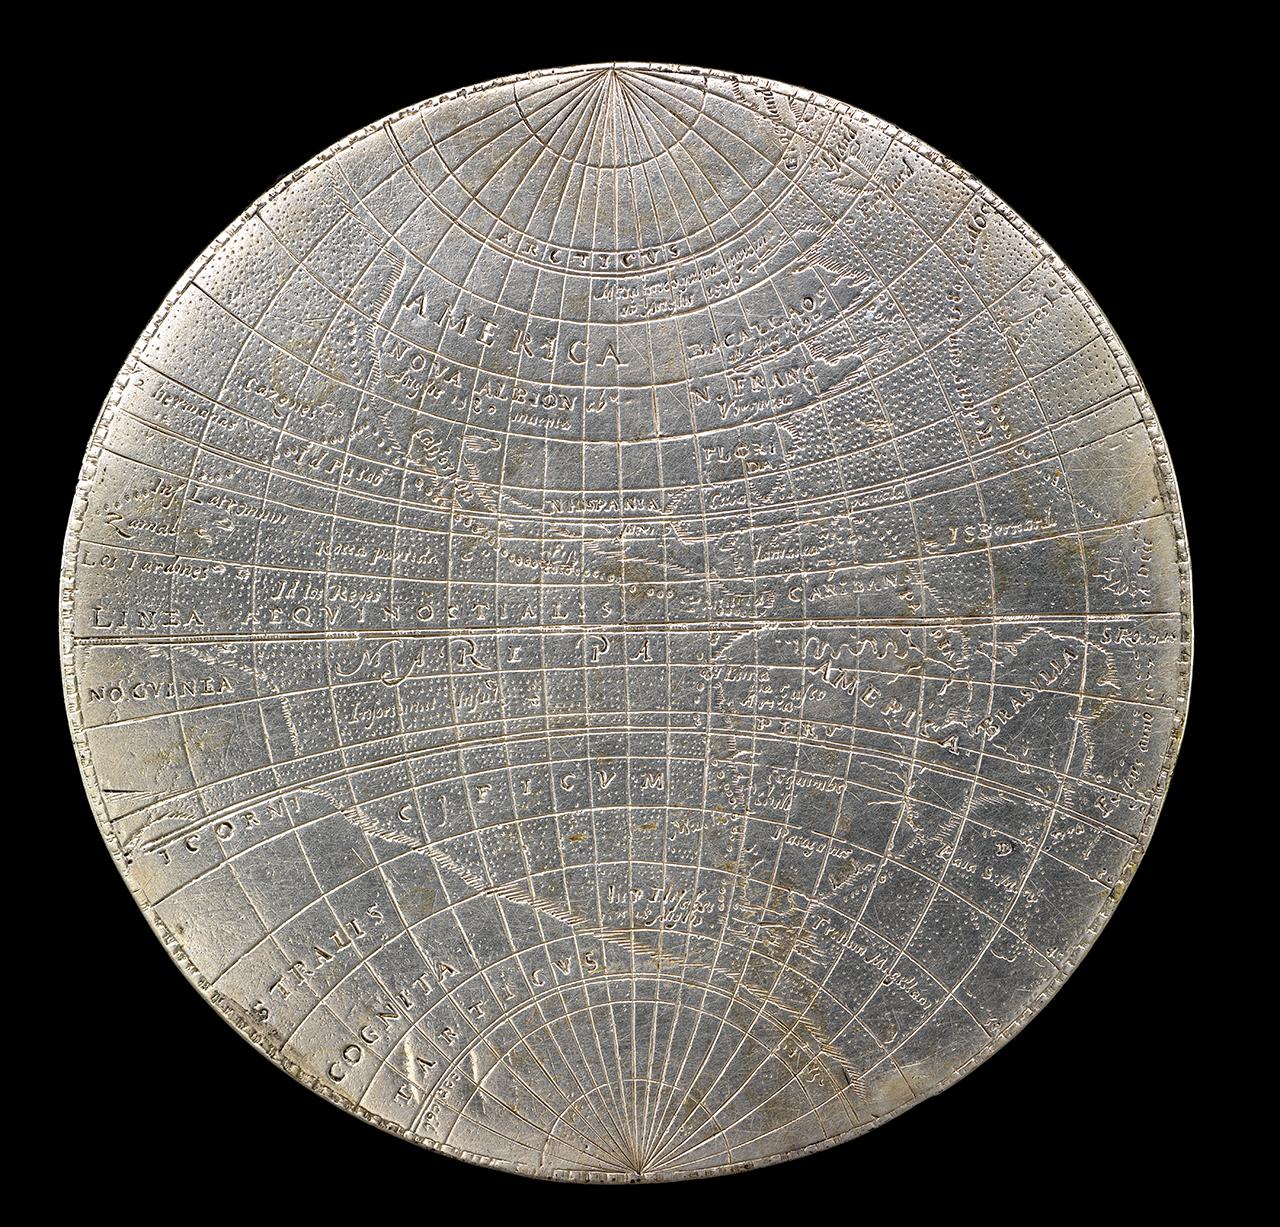 Collection image of medal with engraved world map including latitude and longitudinal lines